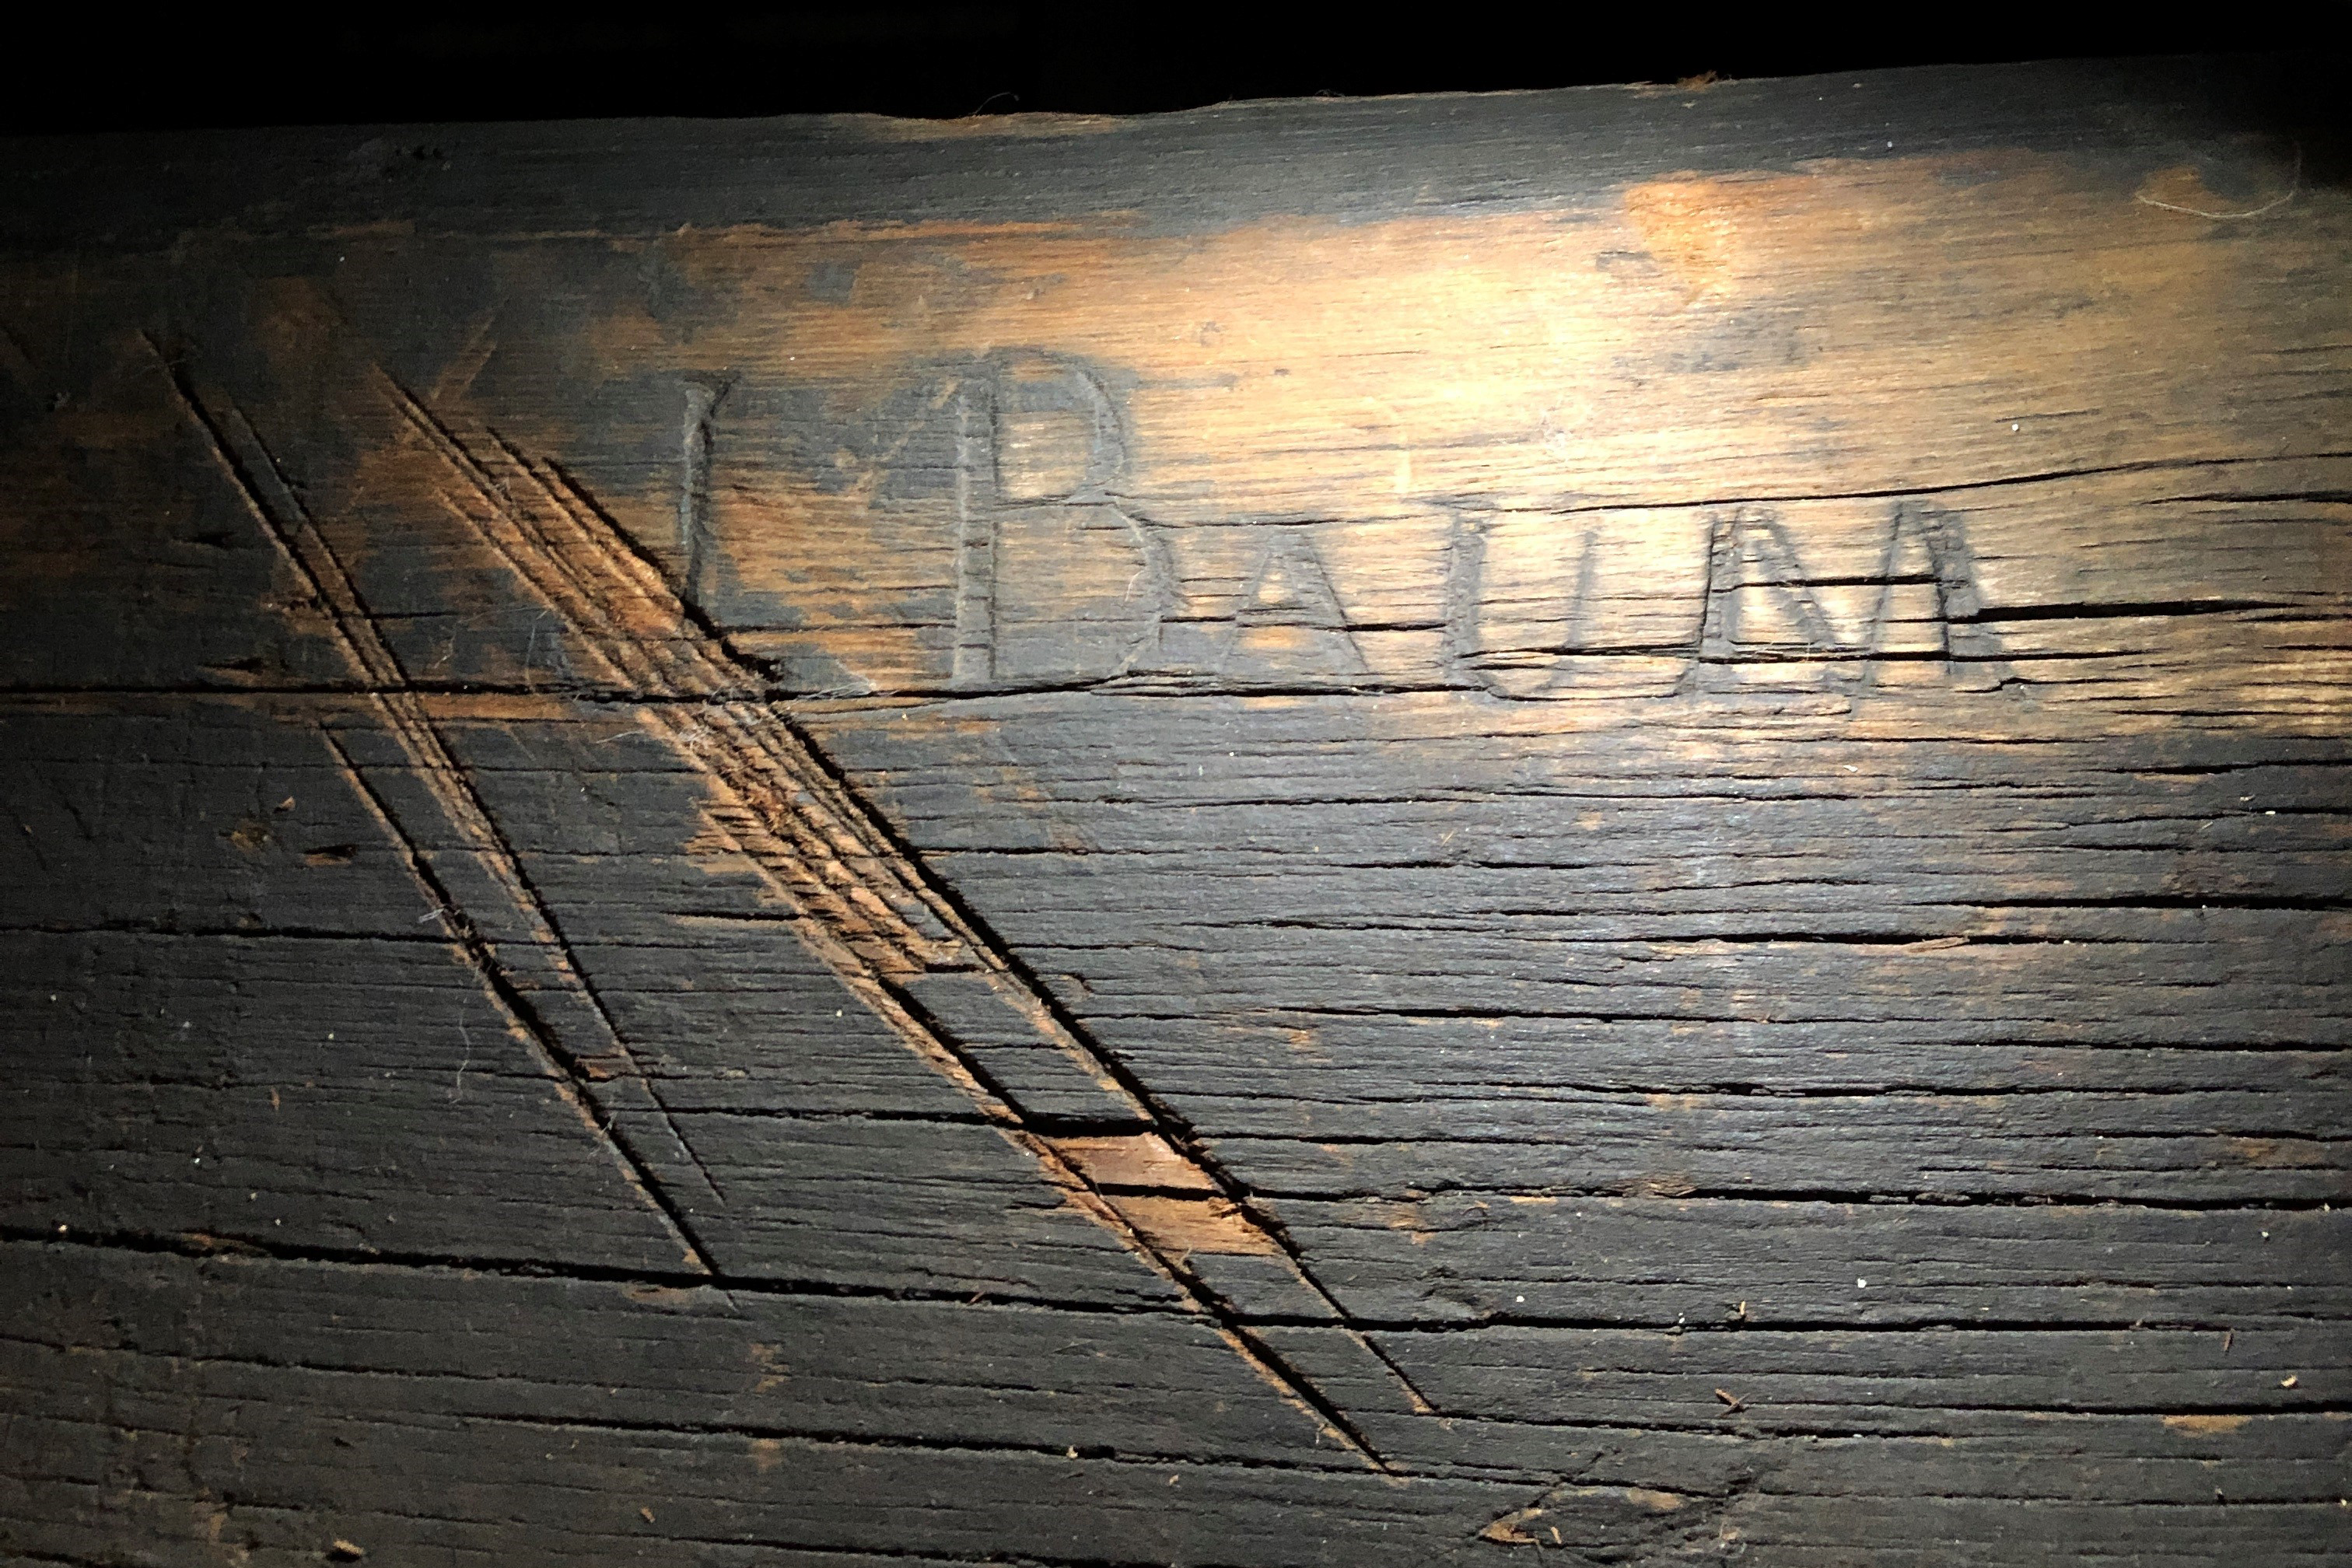 “J. Baum” inscribed inside the roof of the Taft Museum of Art’s portico